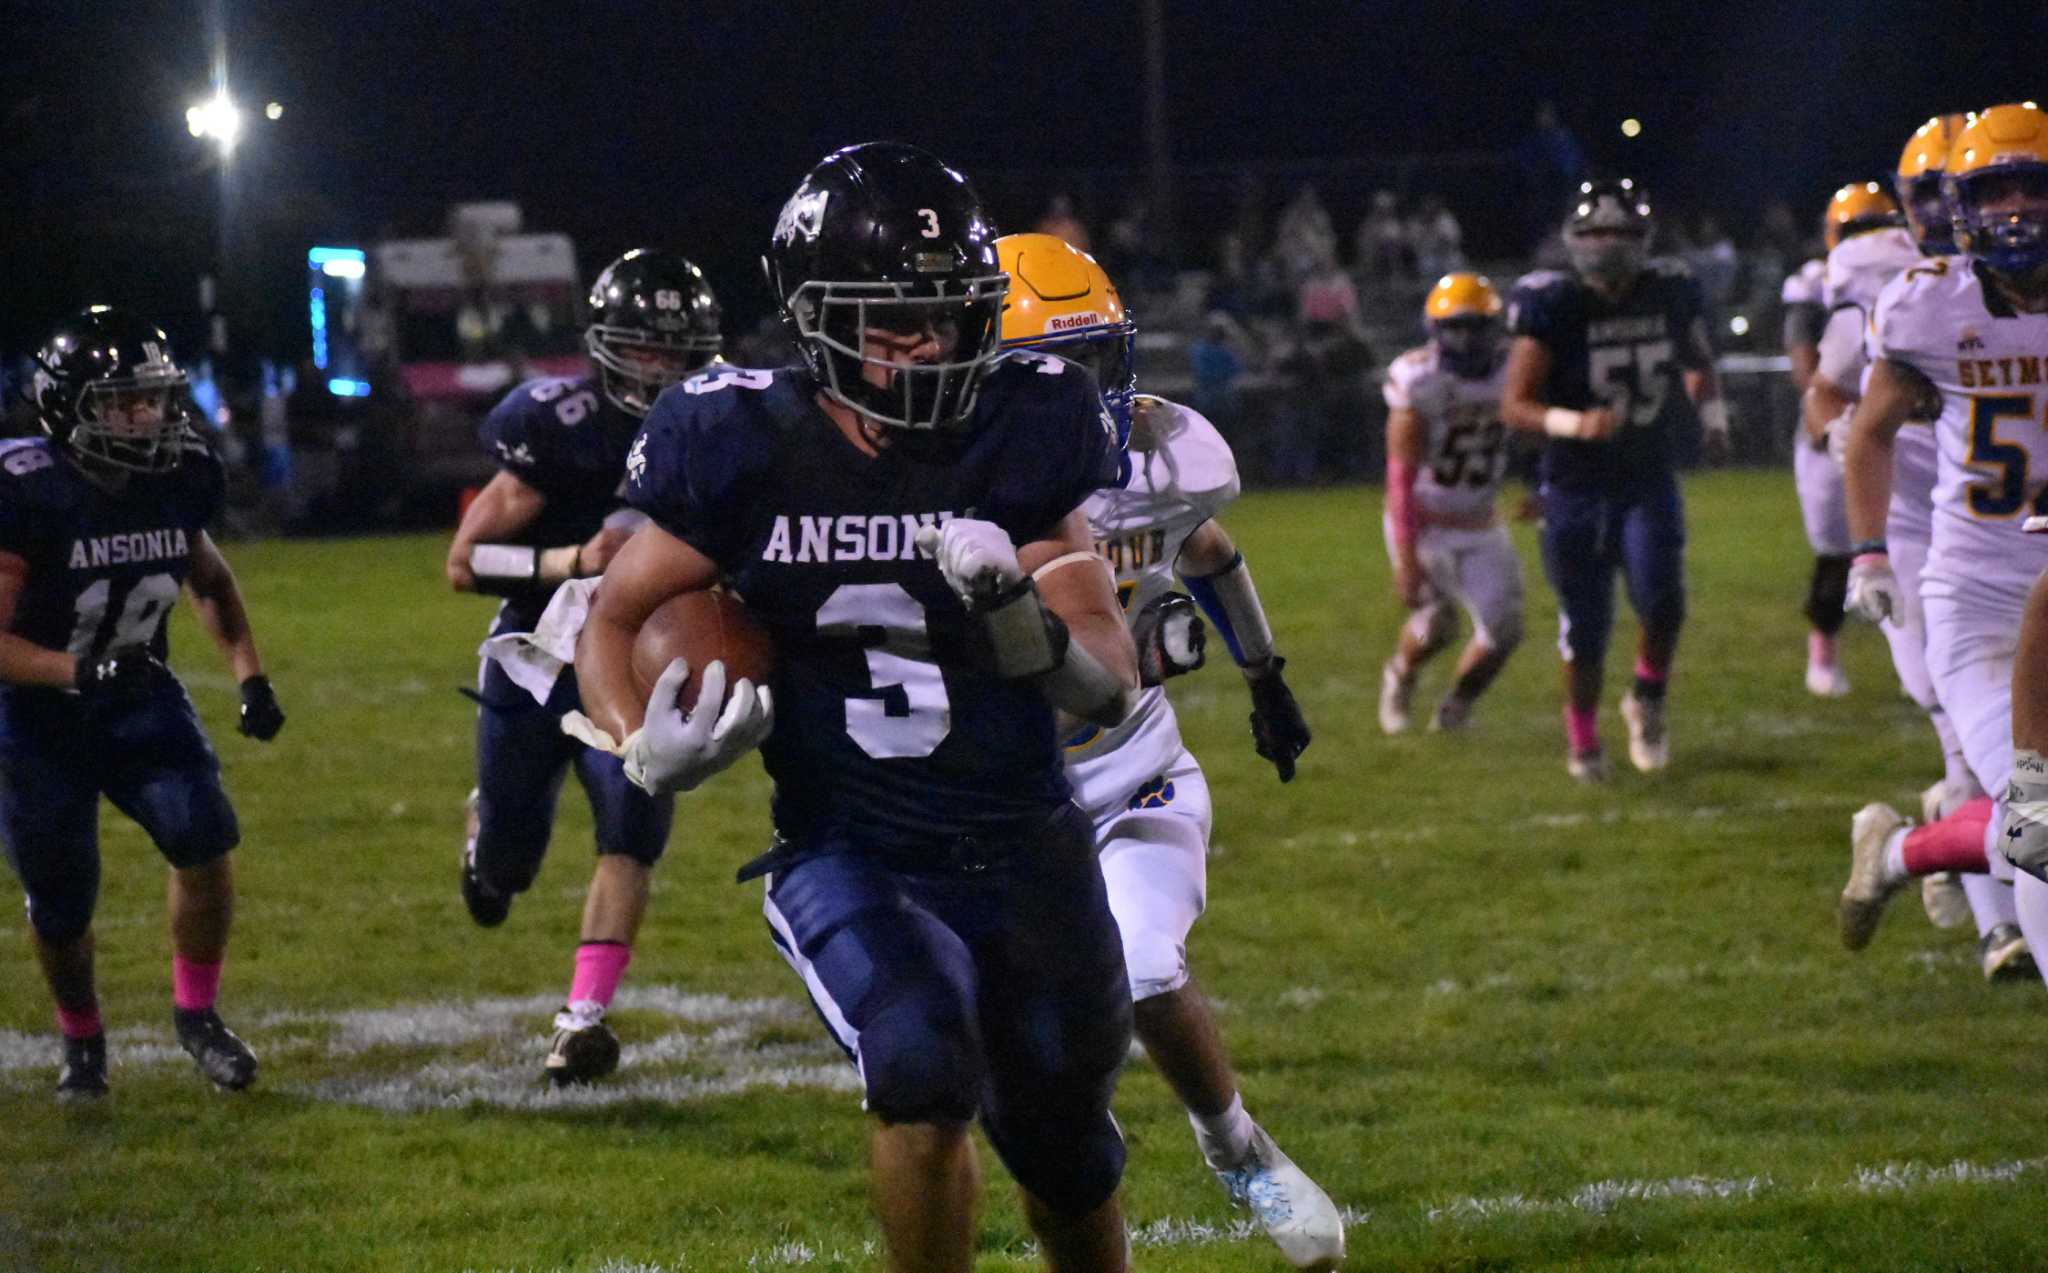 Ansonia High School Football 2022 Preview: Chargers vying for return to glory